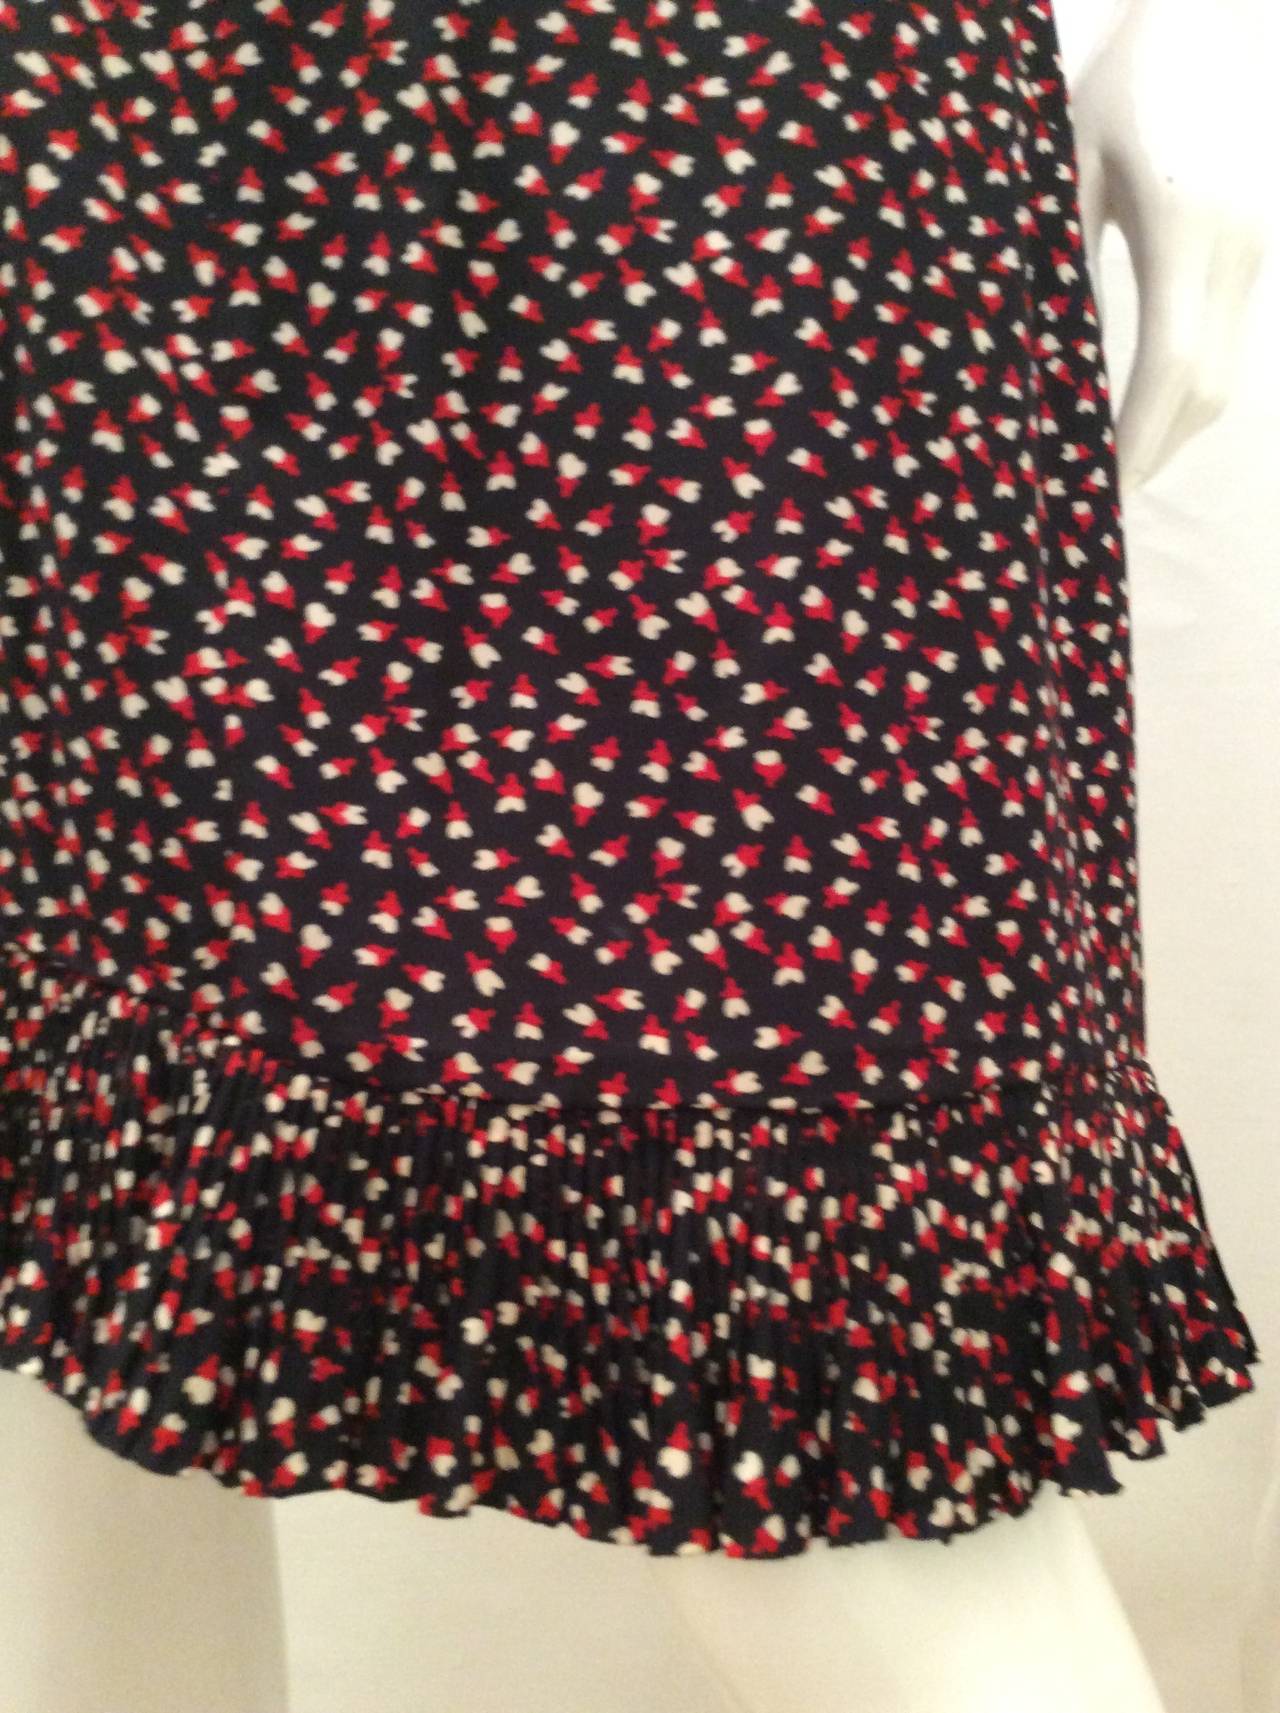 Couture Yves Saint Laurent / YSL 2 Piece Blouse with Skirt 1